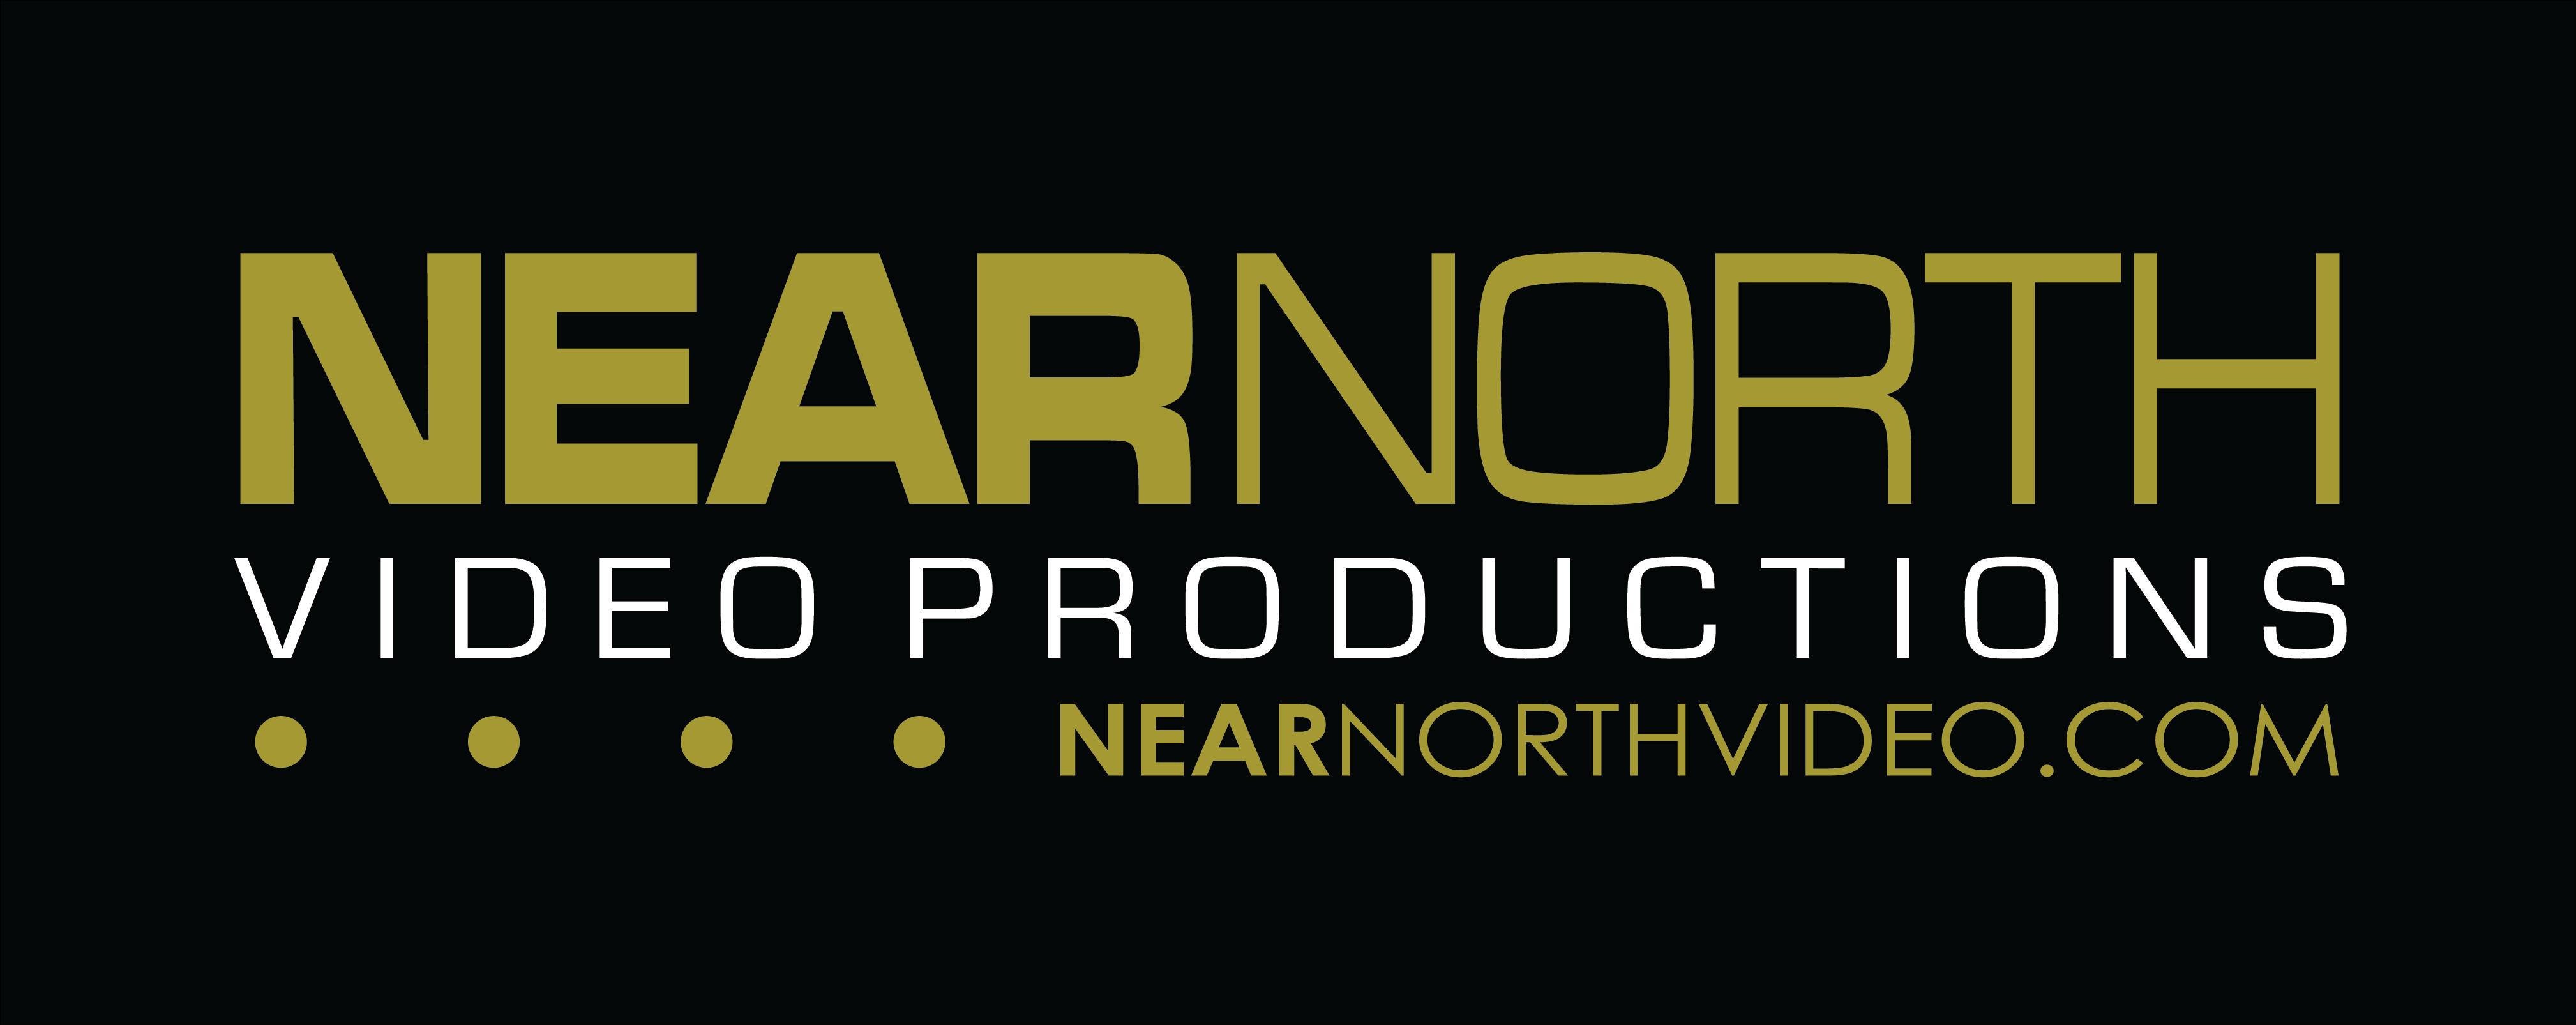 Near North Video Productions